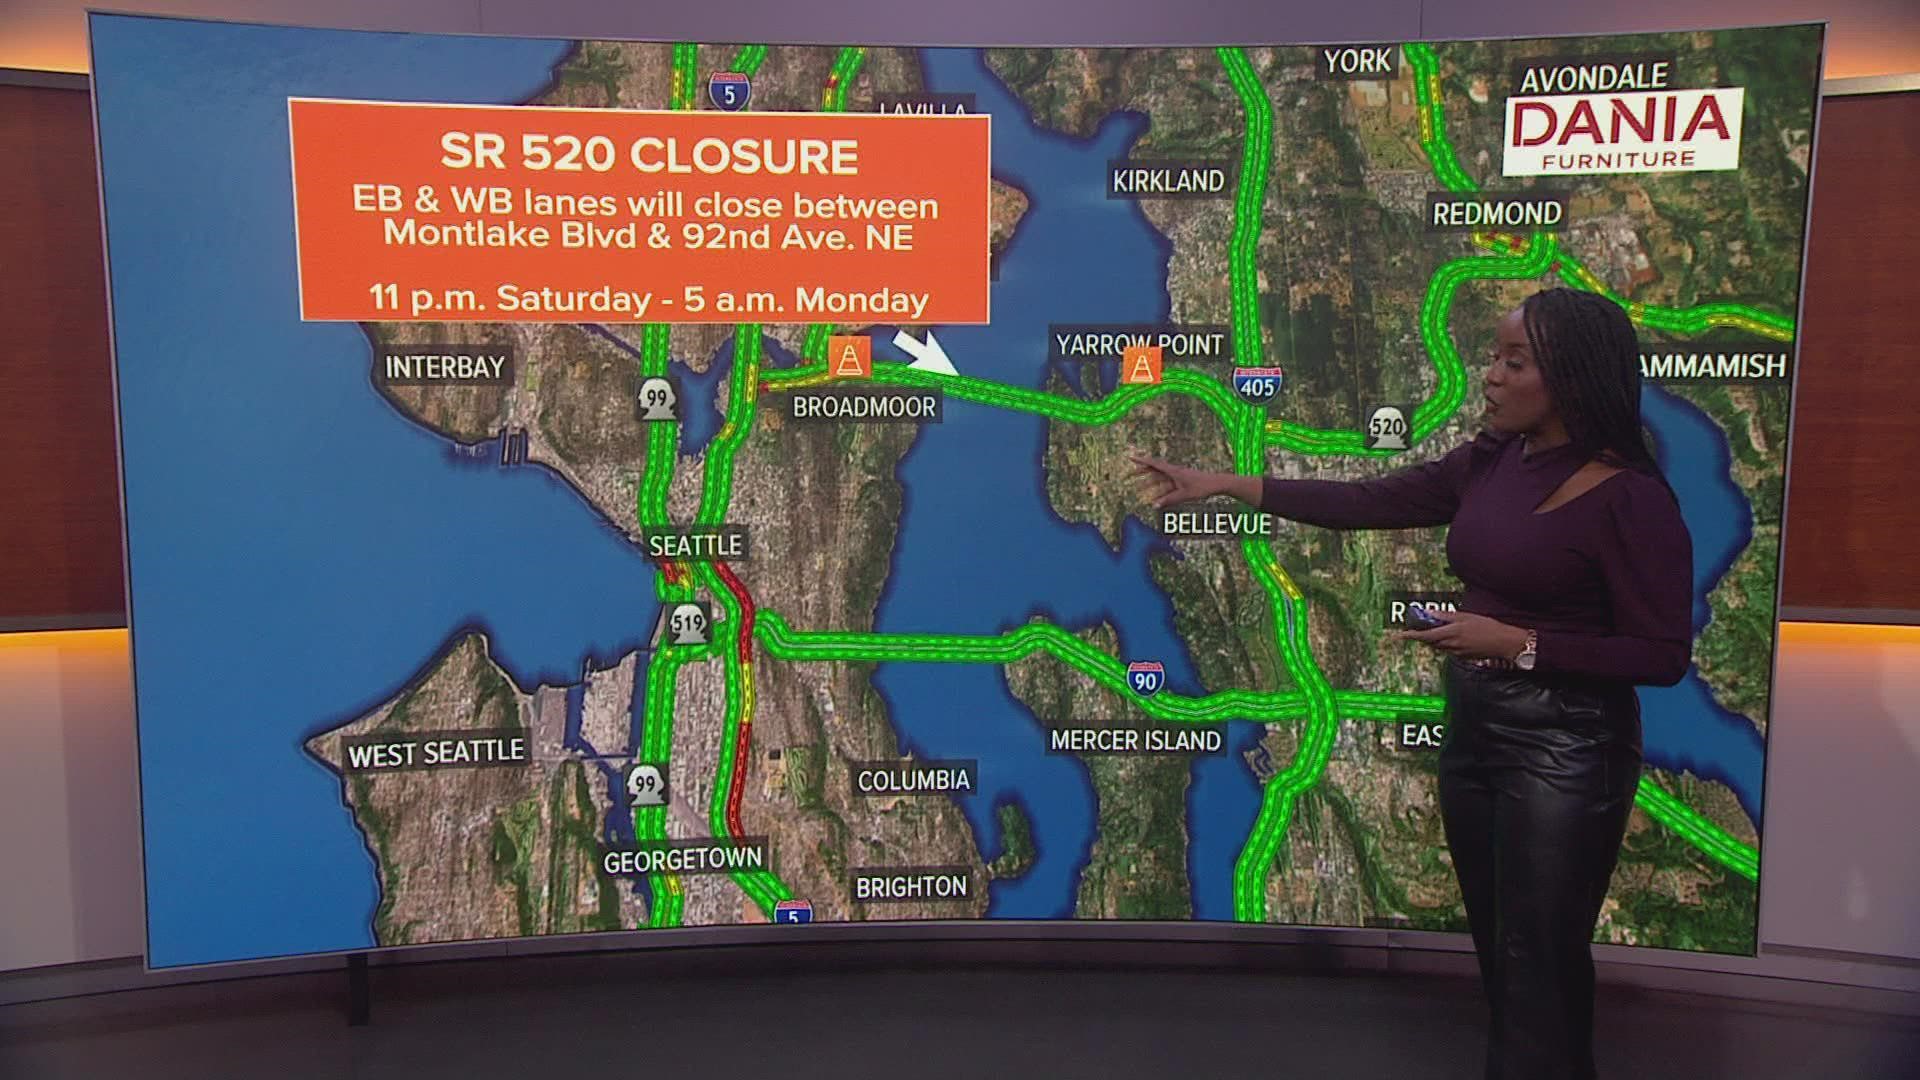 The highway closures begin at 11 p.m. on Friday.